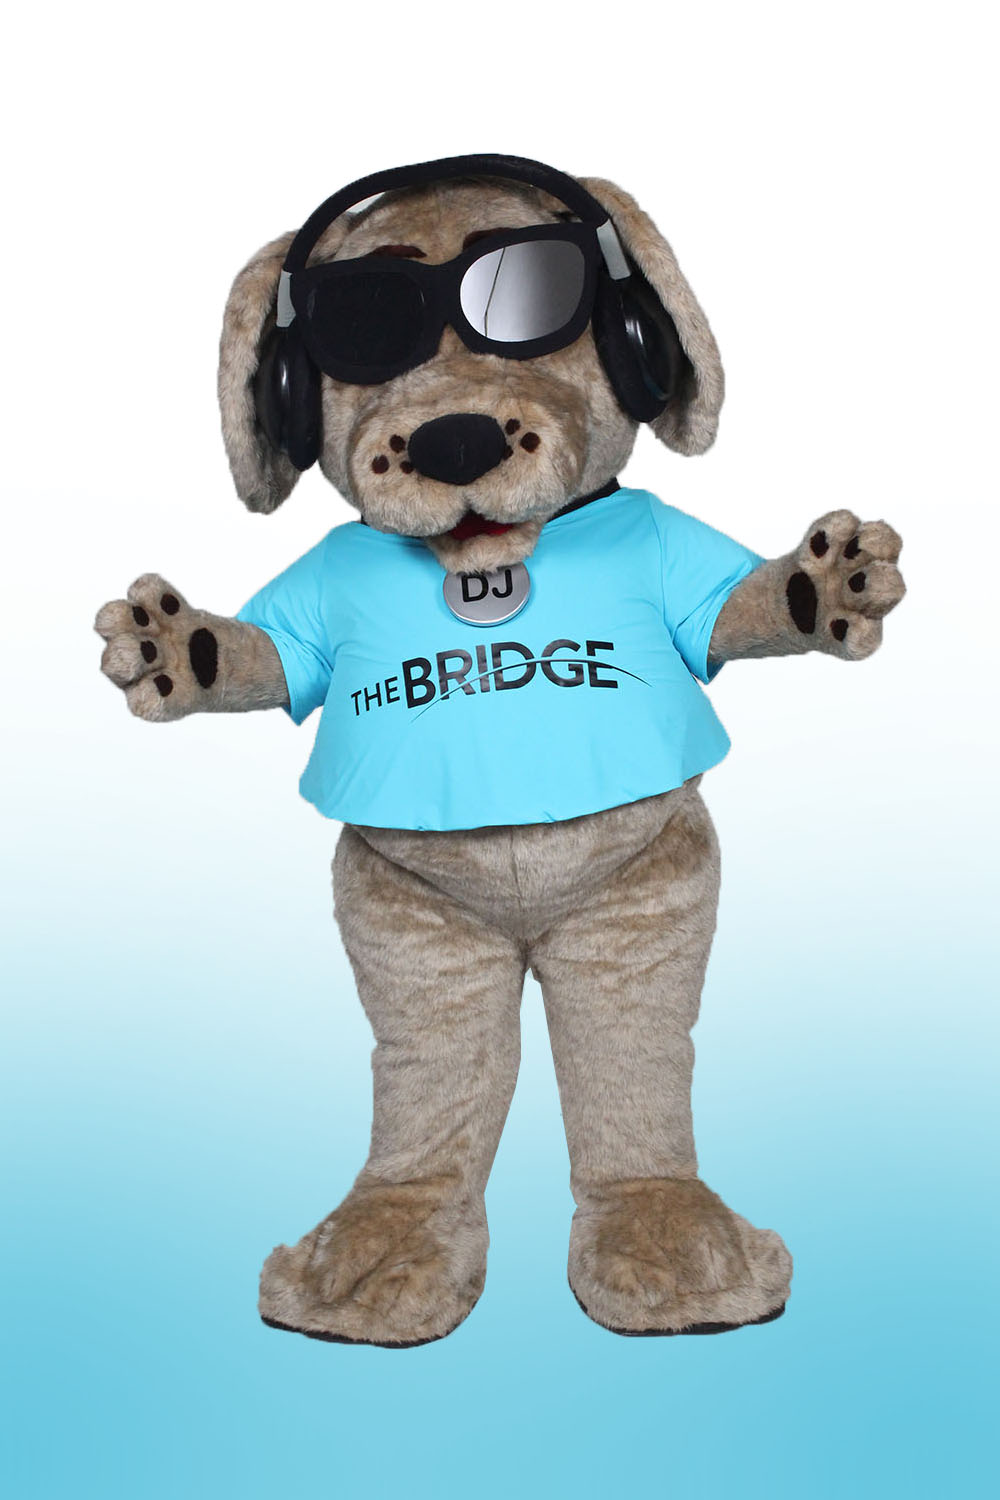 Dog Mascot with DJ headset, sunglasses, and blue t-shirt with The Bridge Logo